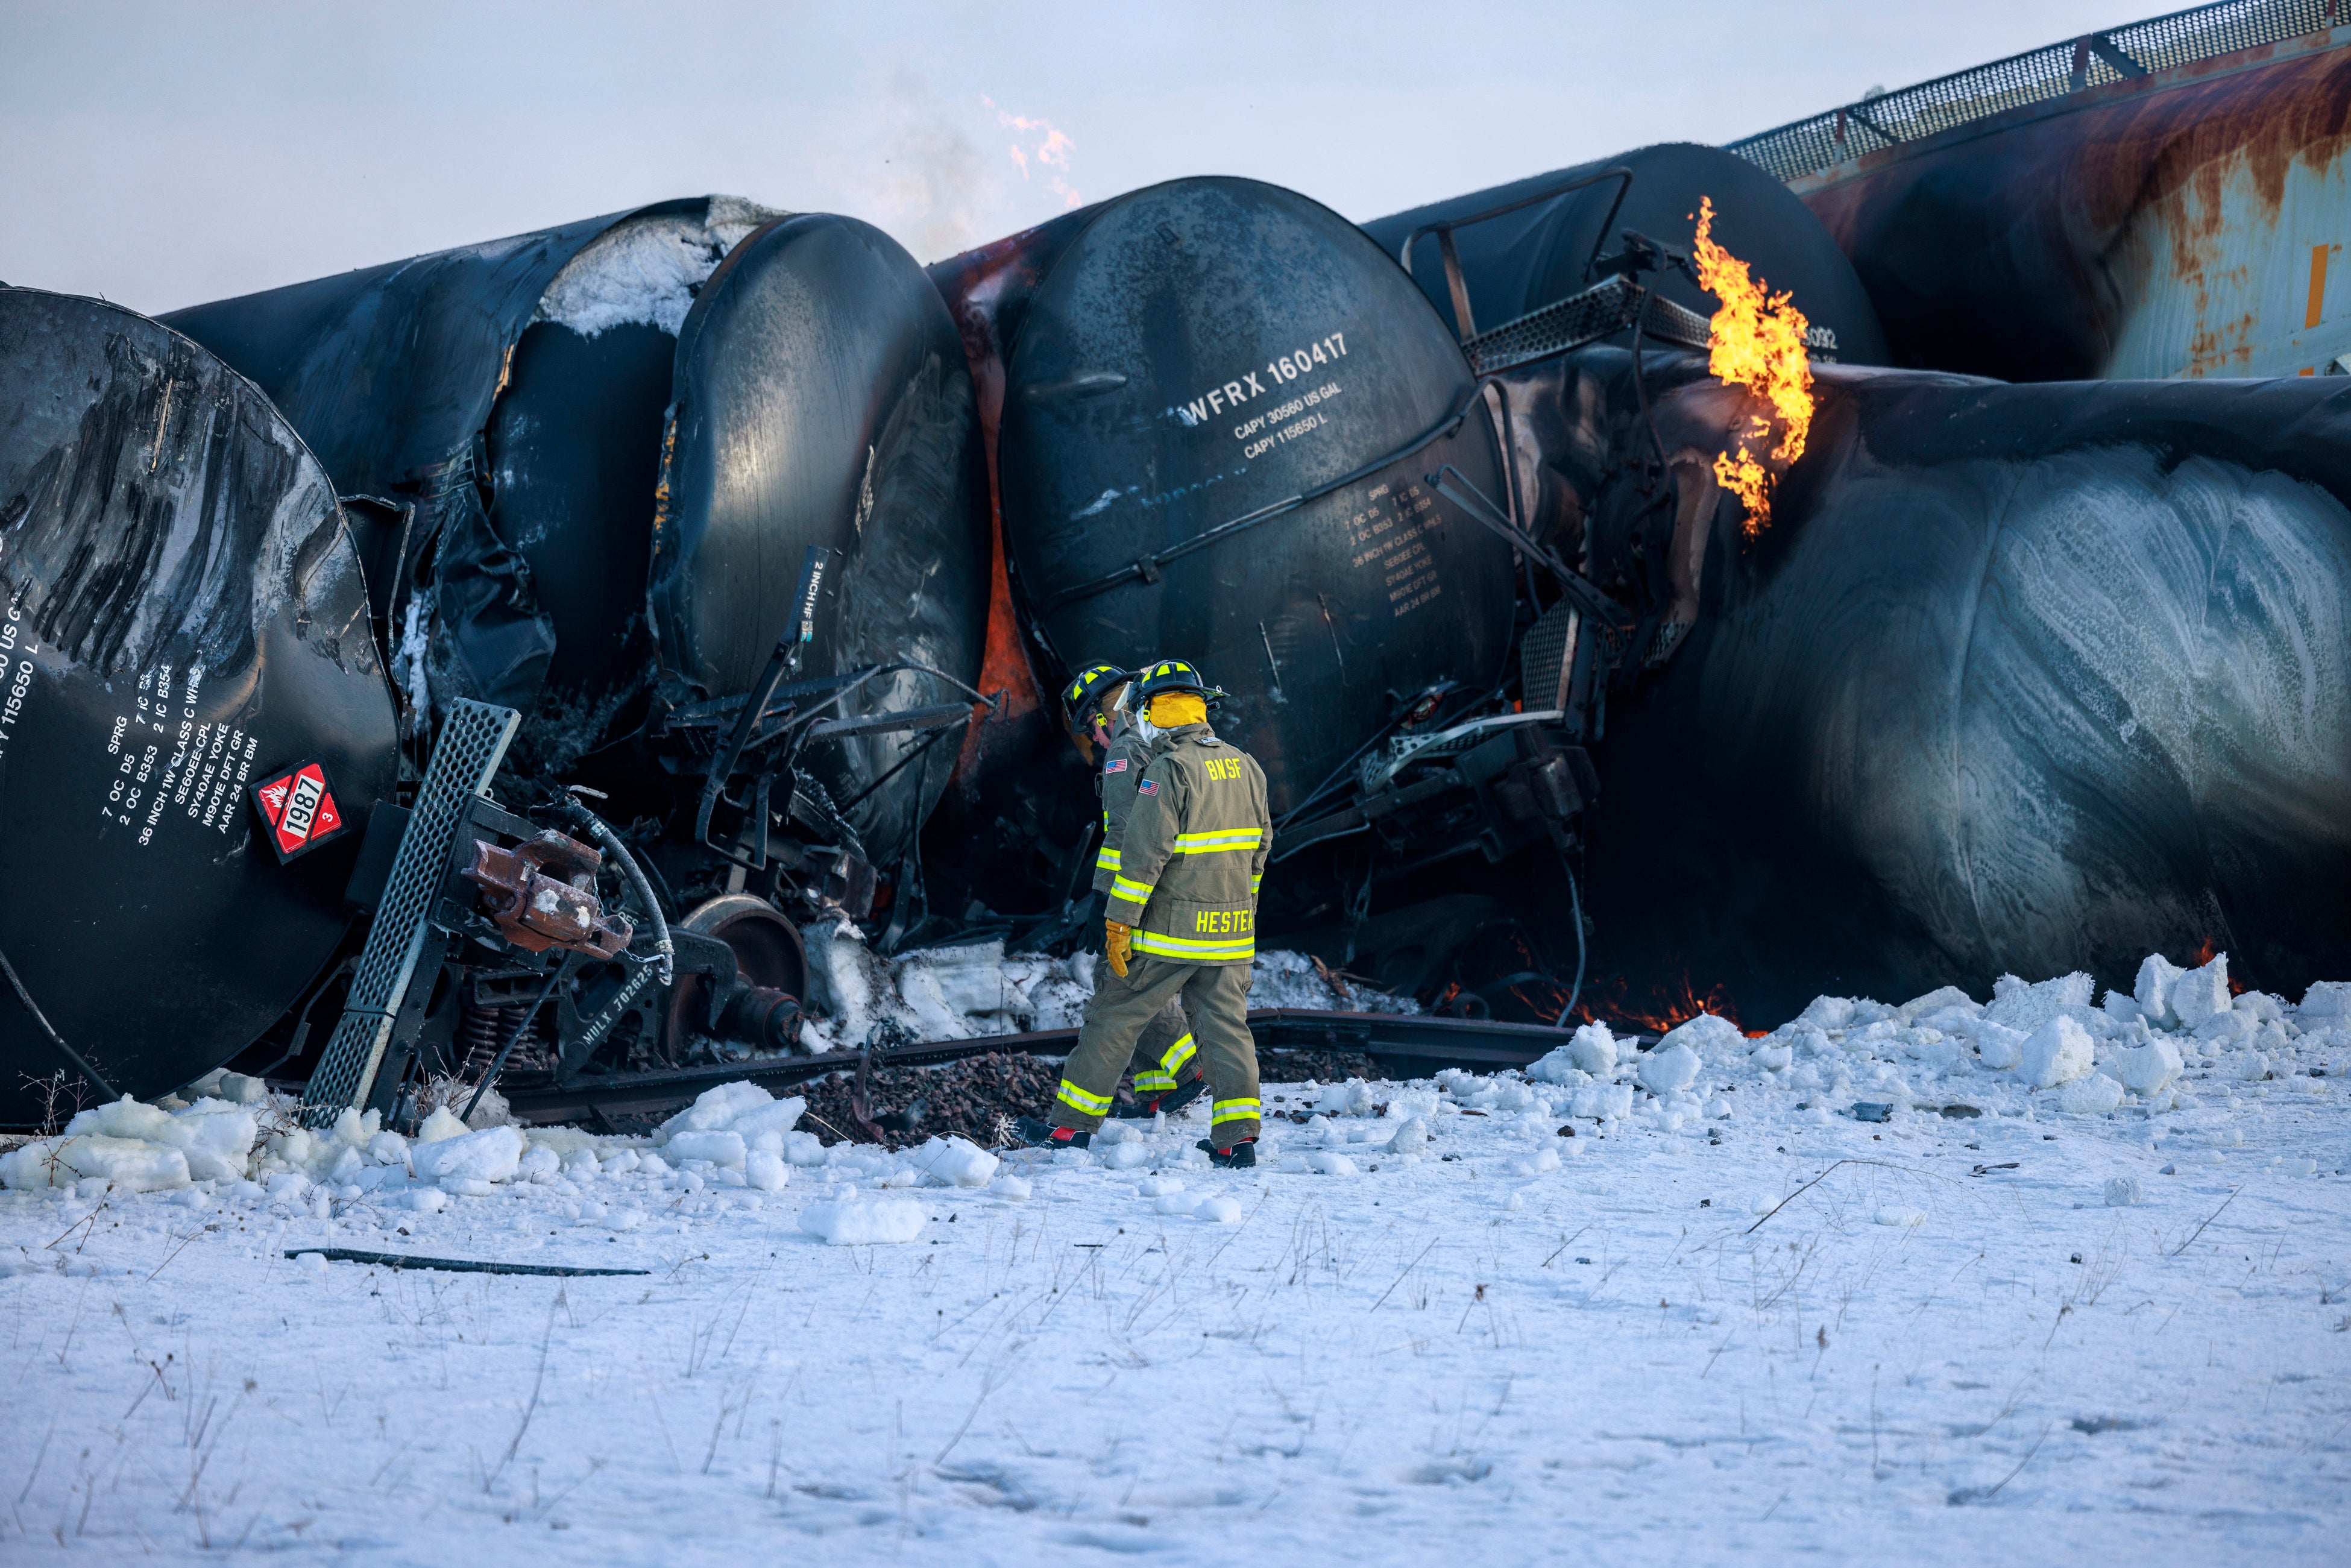 Firefighters work near piled-up train cars, near Raymond, Minnesota on Thursday, March 30, 2023, the morning after a BNSF freight train derailed